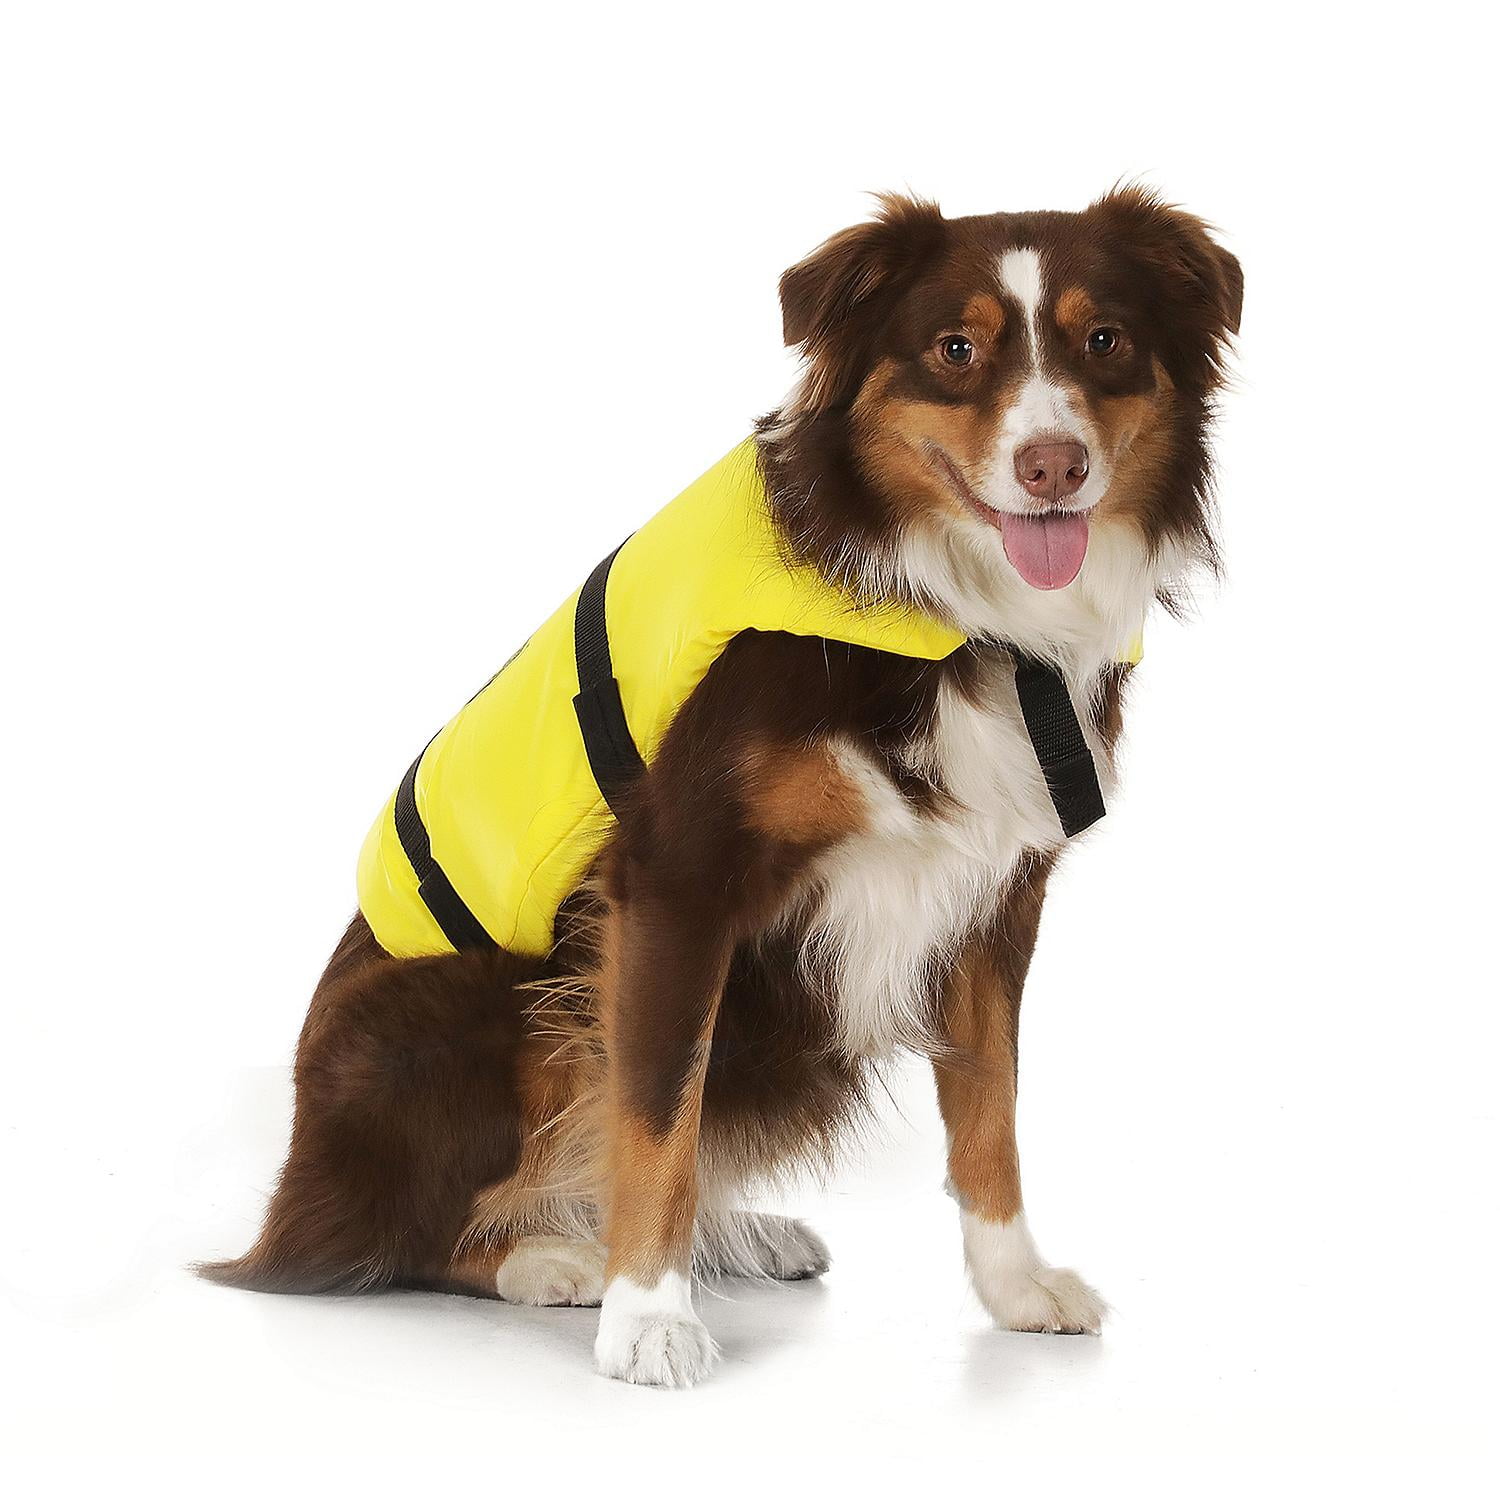 Top Paw Dog Life Jacket Yellow - Size Xtra Small - 5-15 lbs